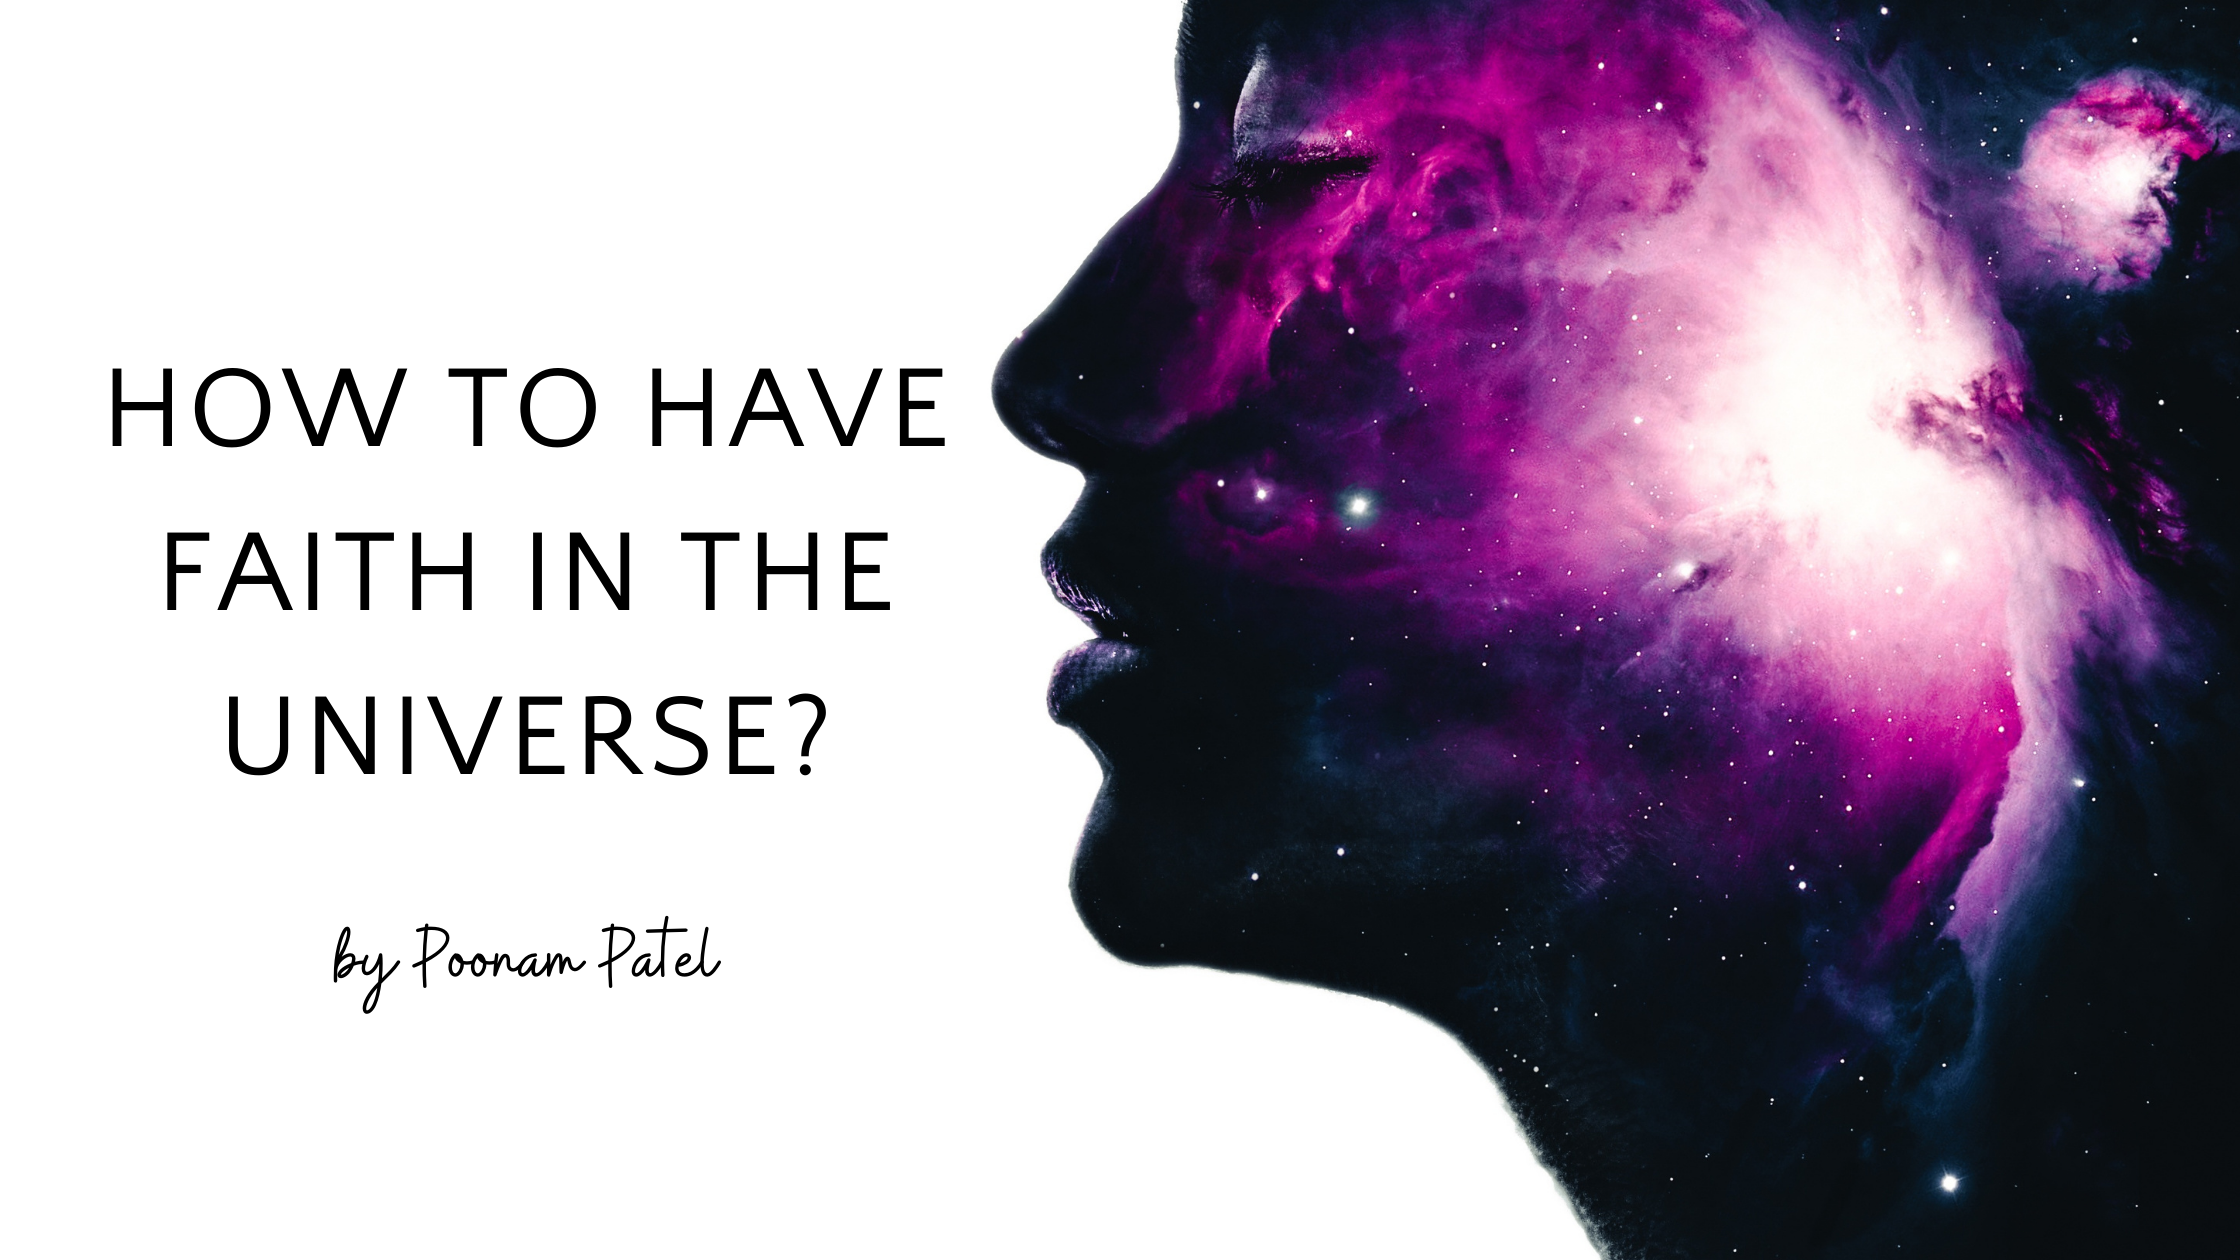 How to have faith in the Universe?